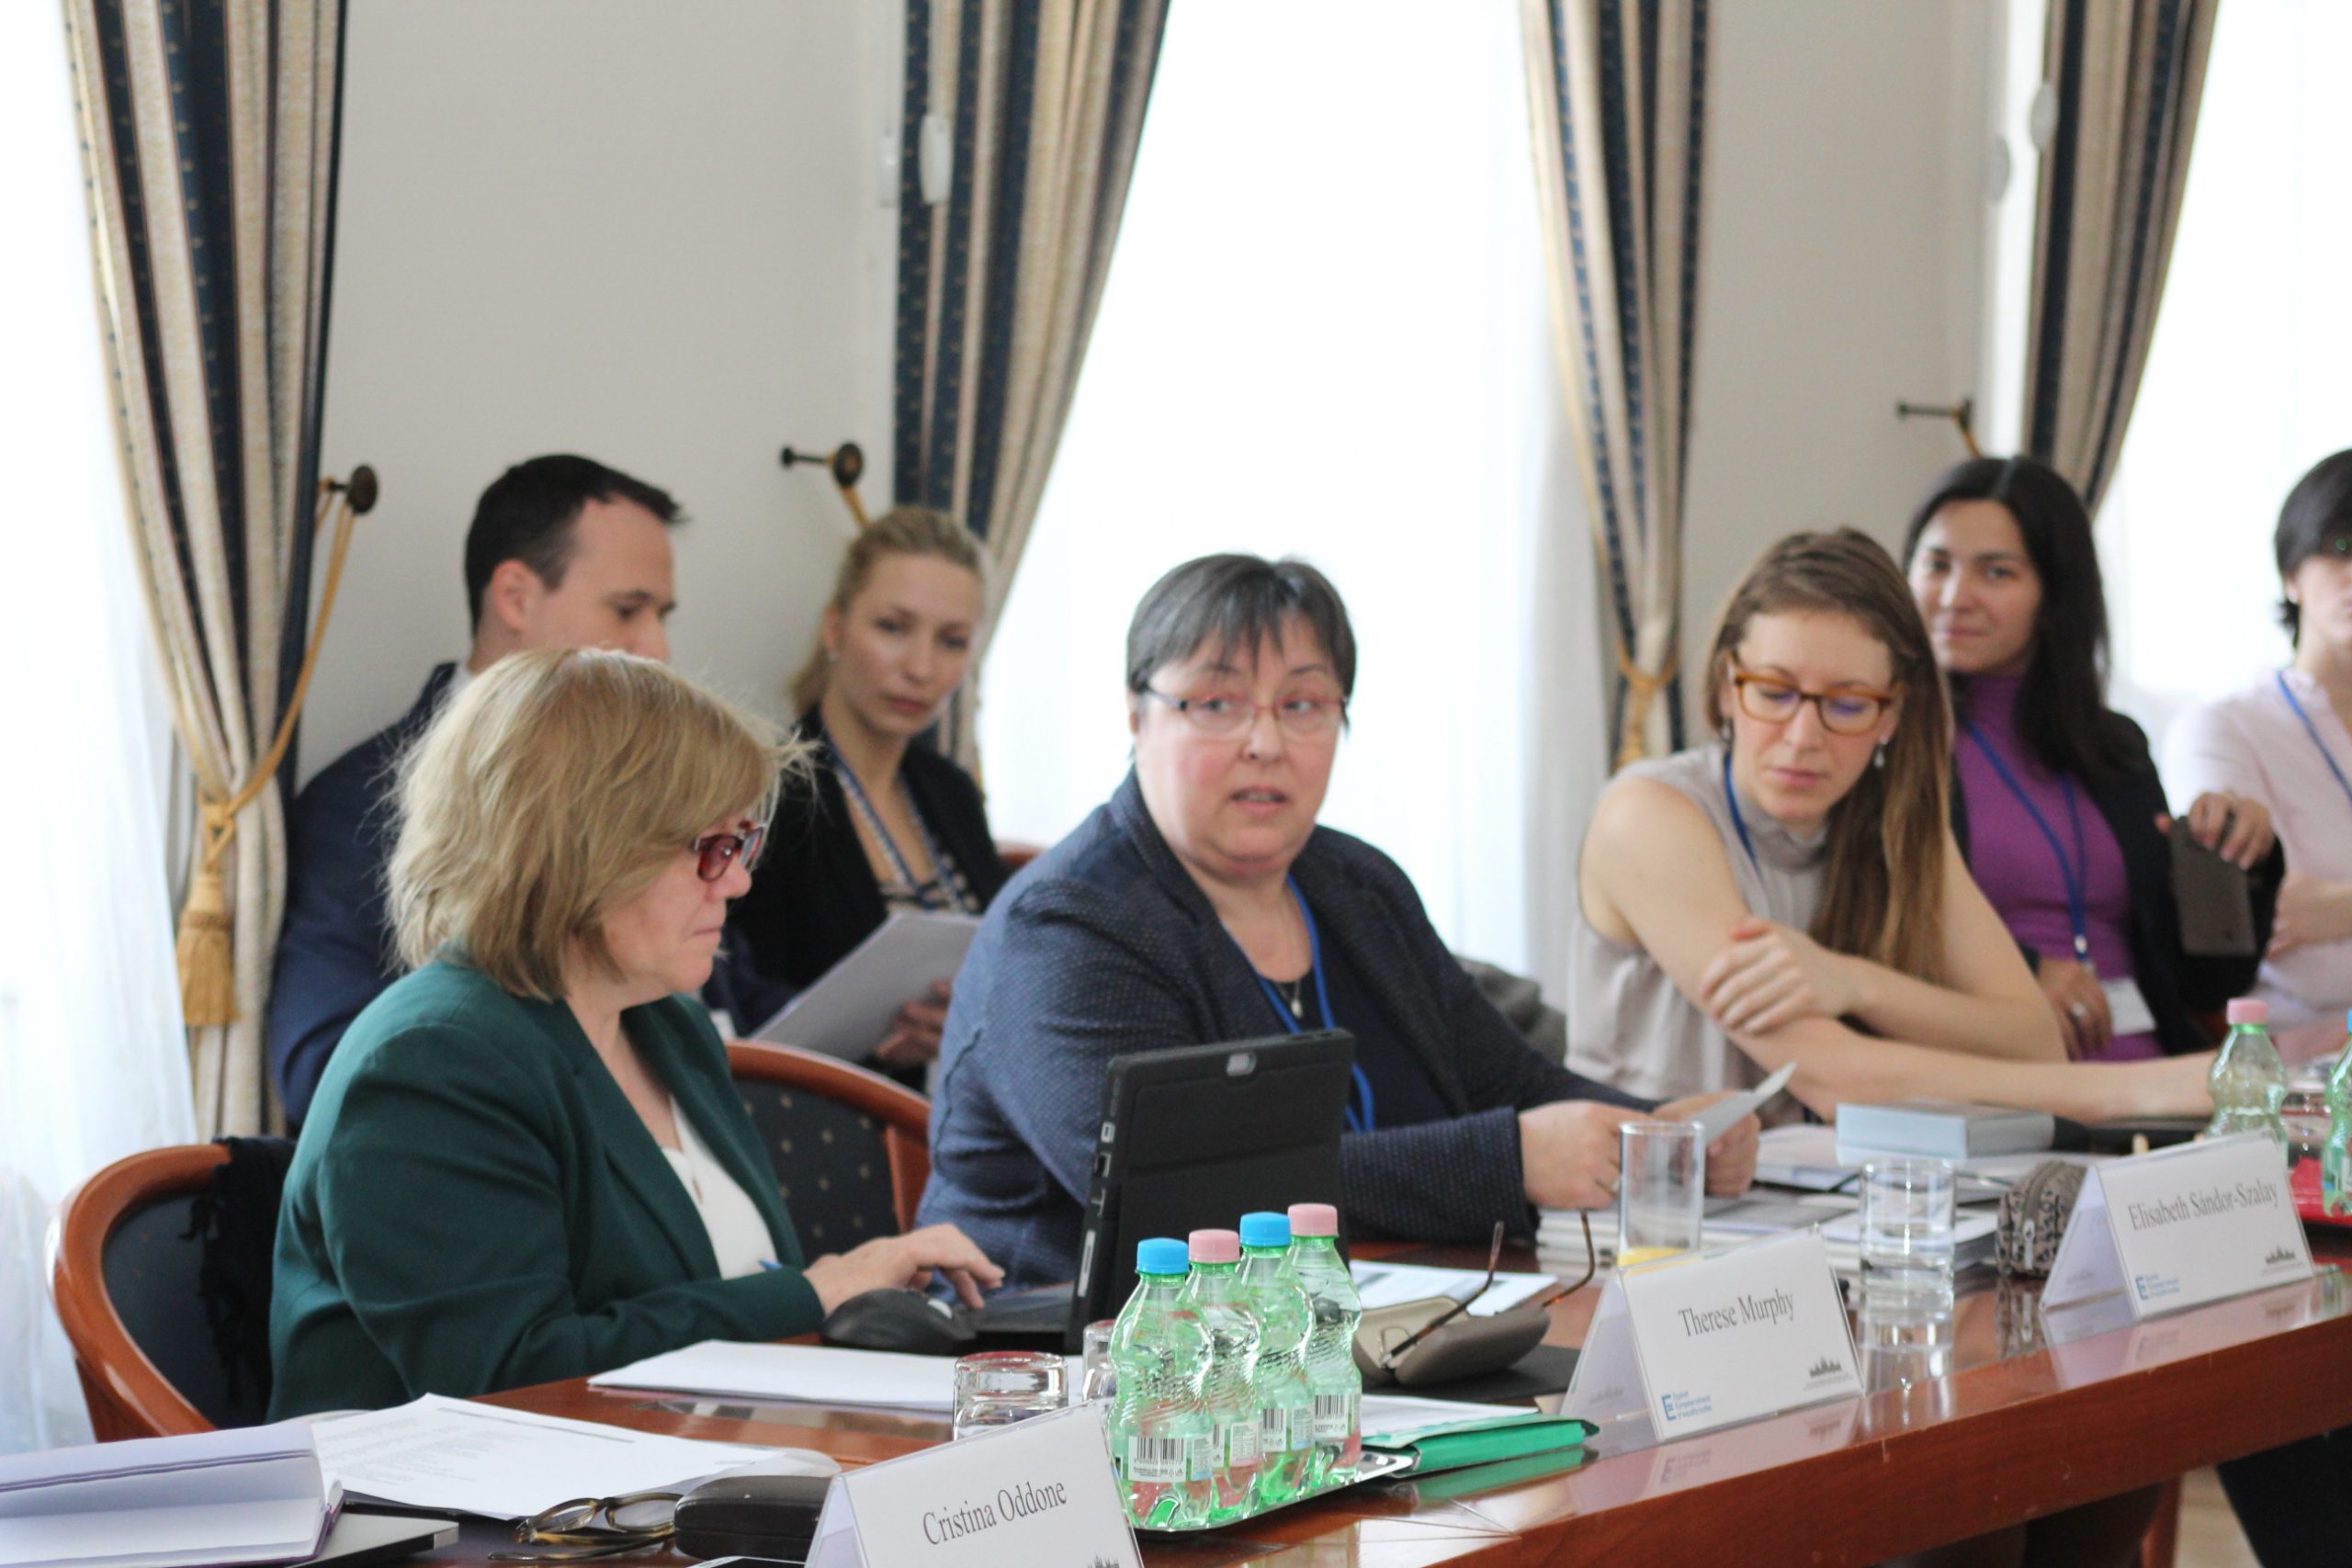 Erzsébet Szalayné Sándor opens the Equinet project meeting on combating violence against women